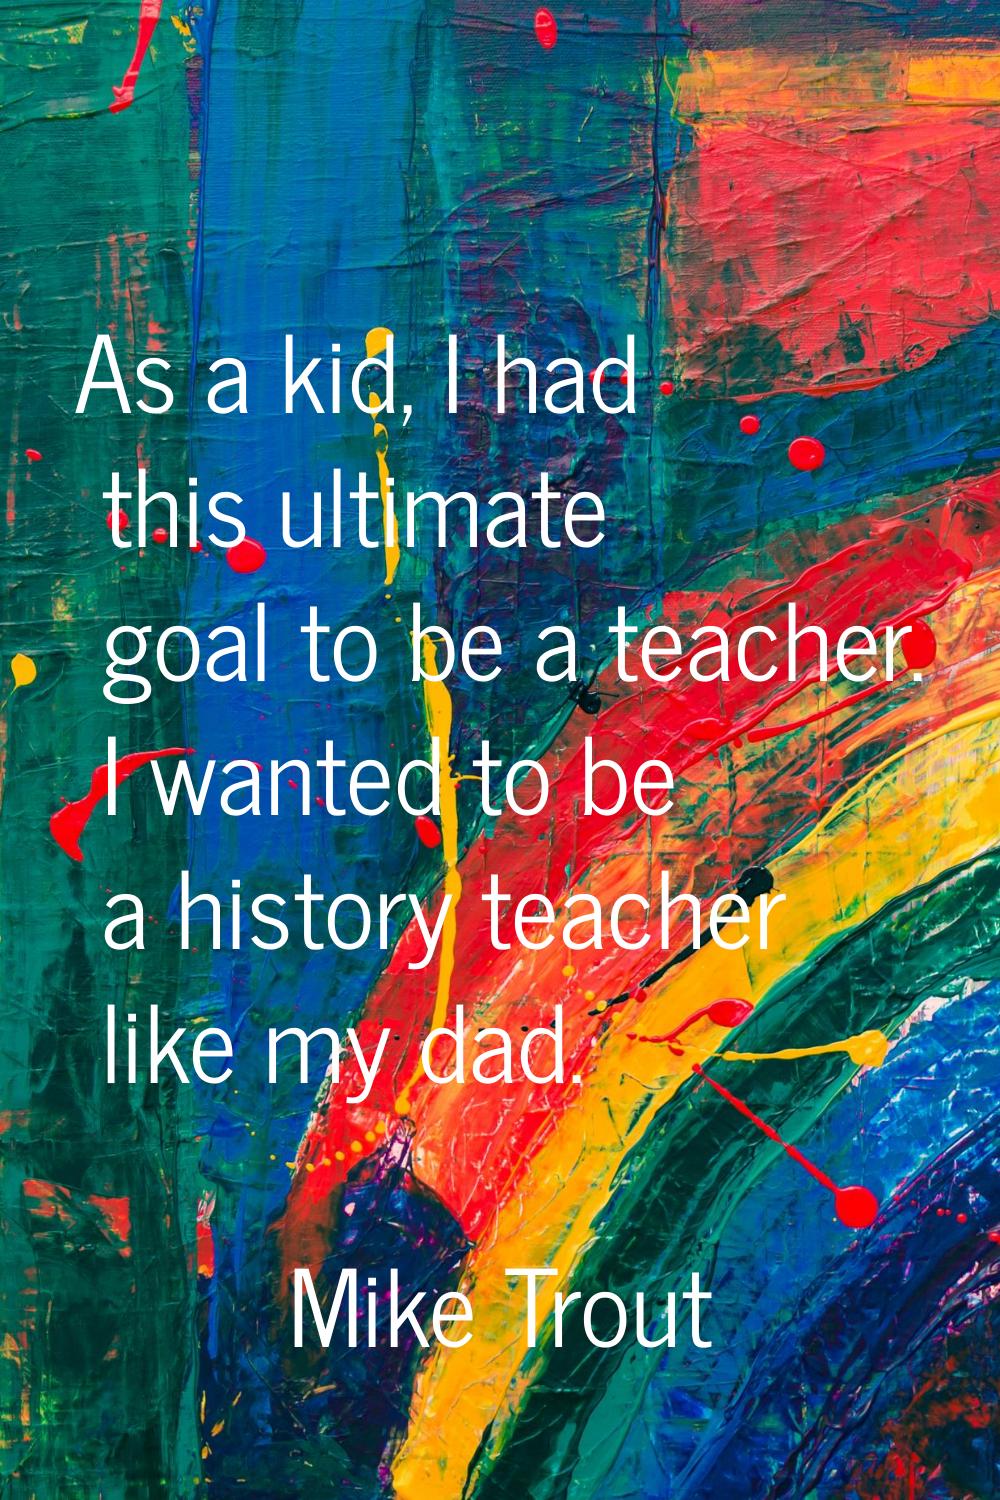 As a kid, I had this ultimate goal to be a teacher. I wanted to be a history teacher like my dad.